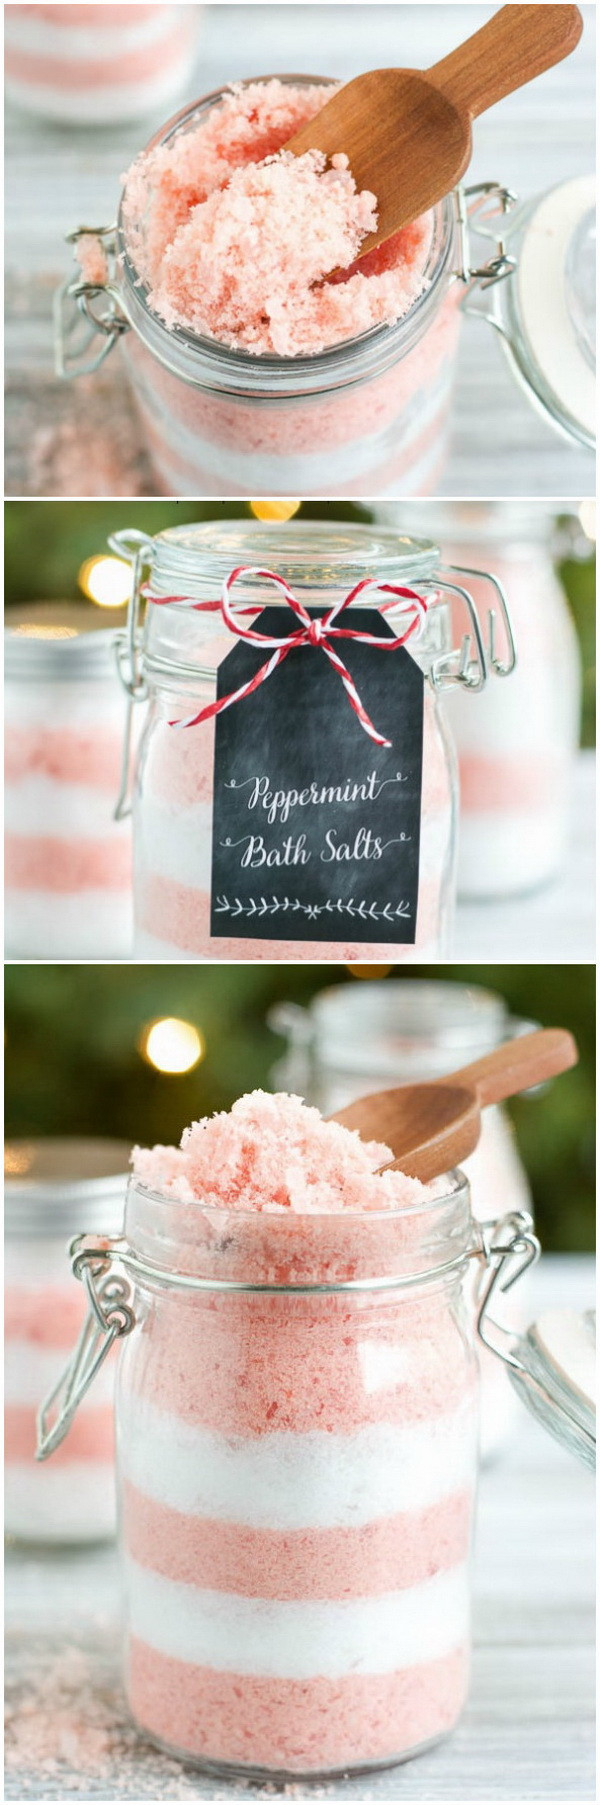 Homemade Holiday Gift Ideas
 30 Homemade Christmas Gifts Everyone will Love For